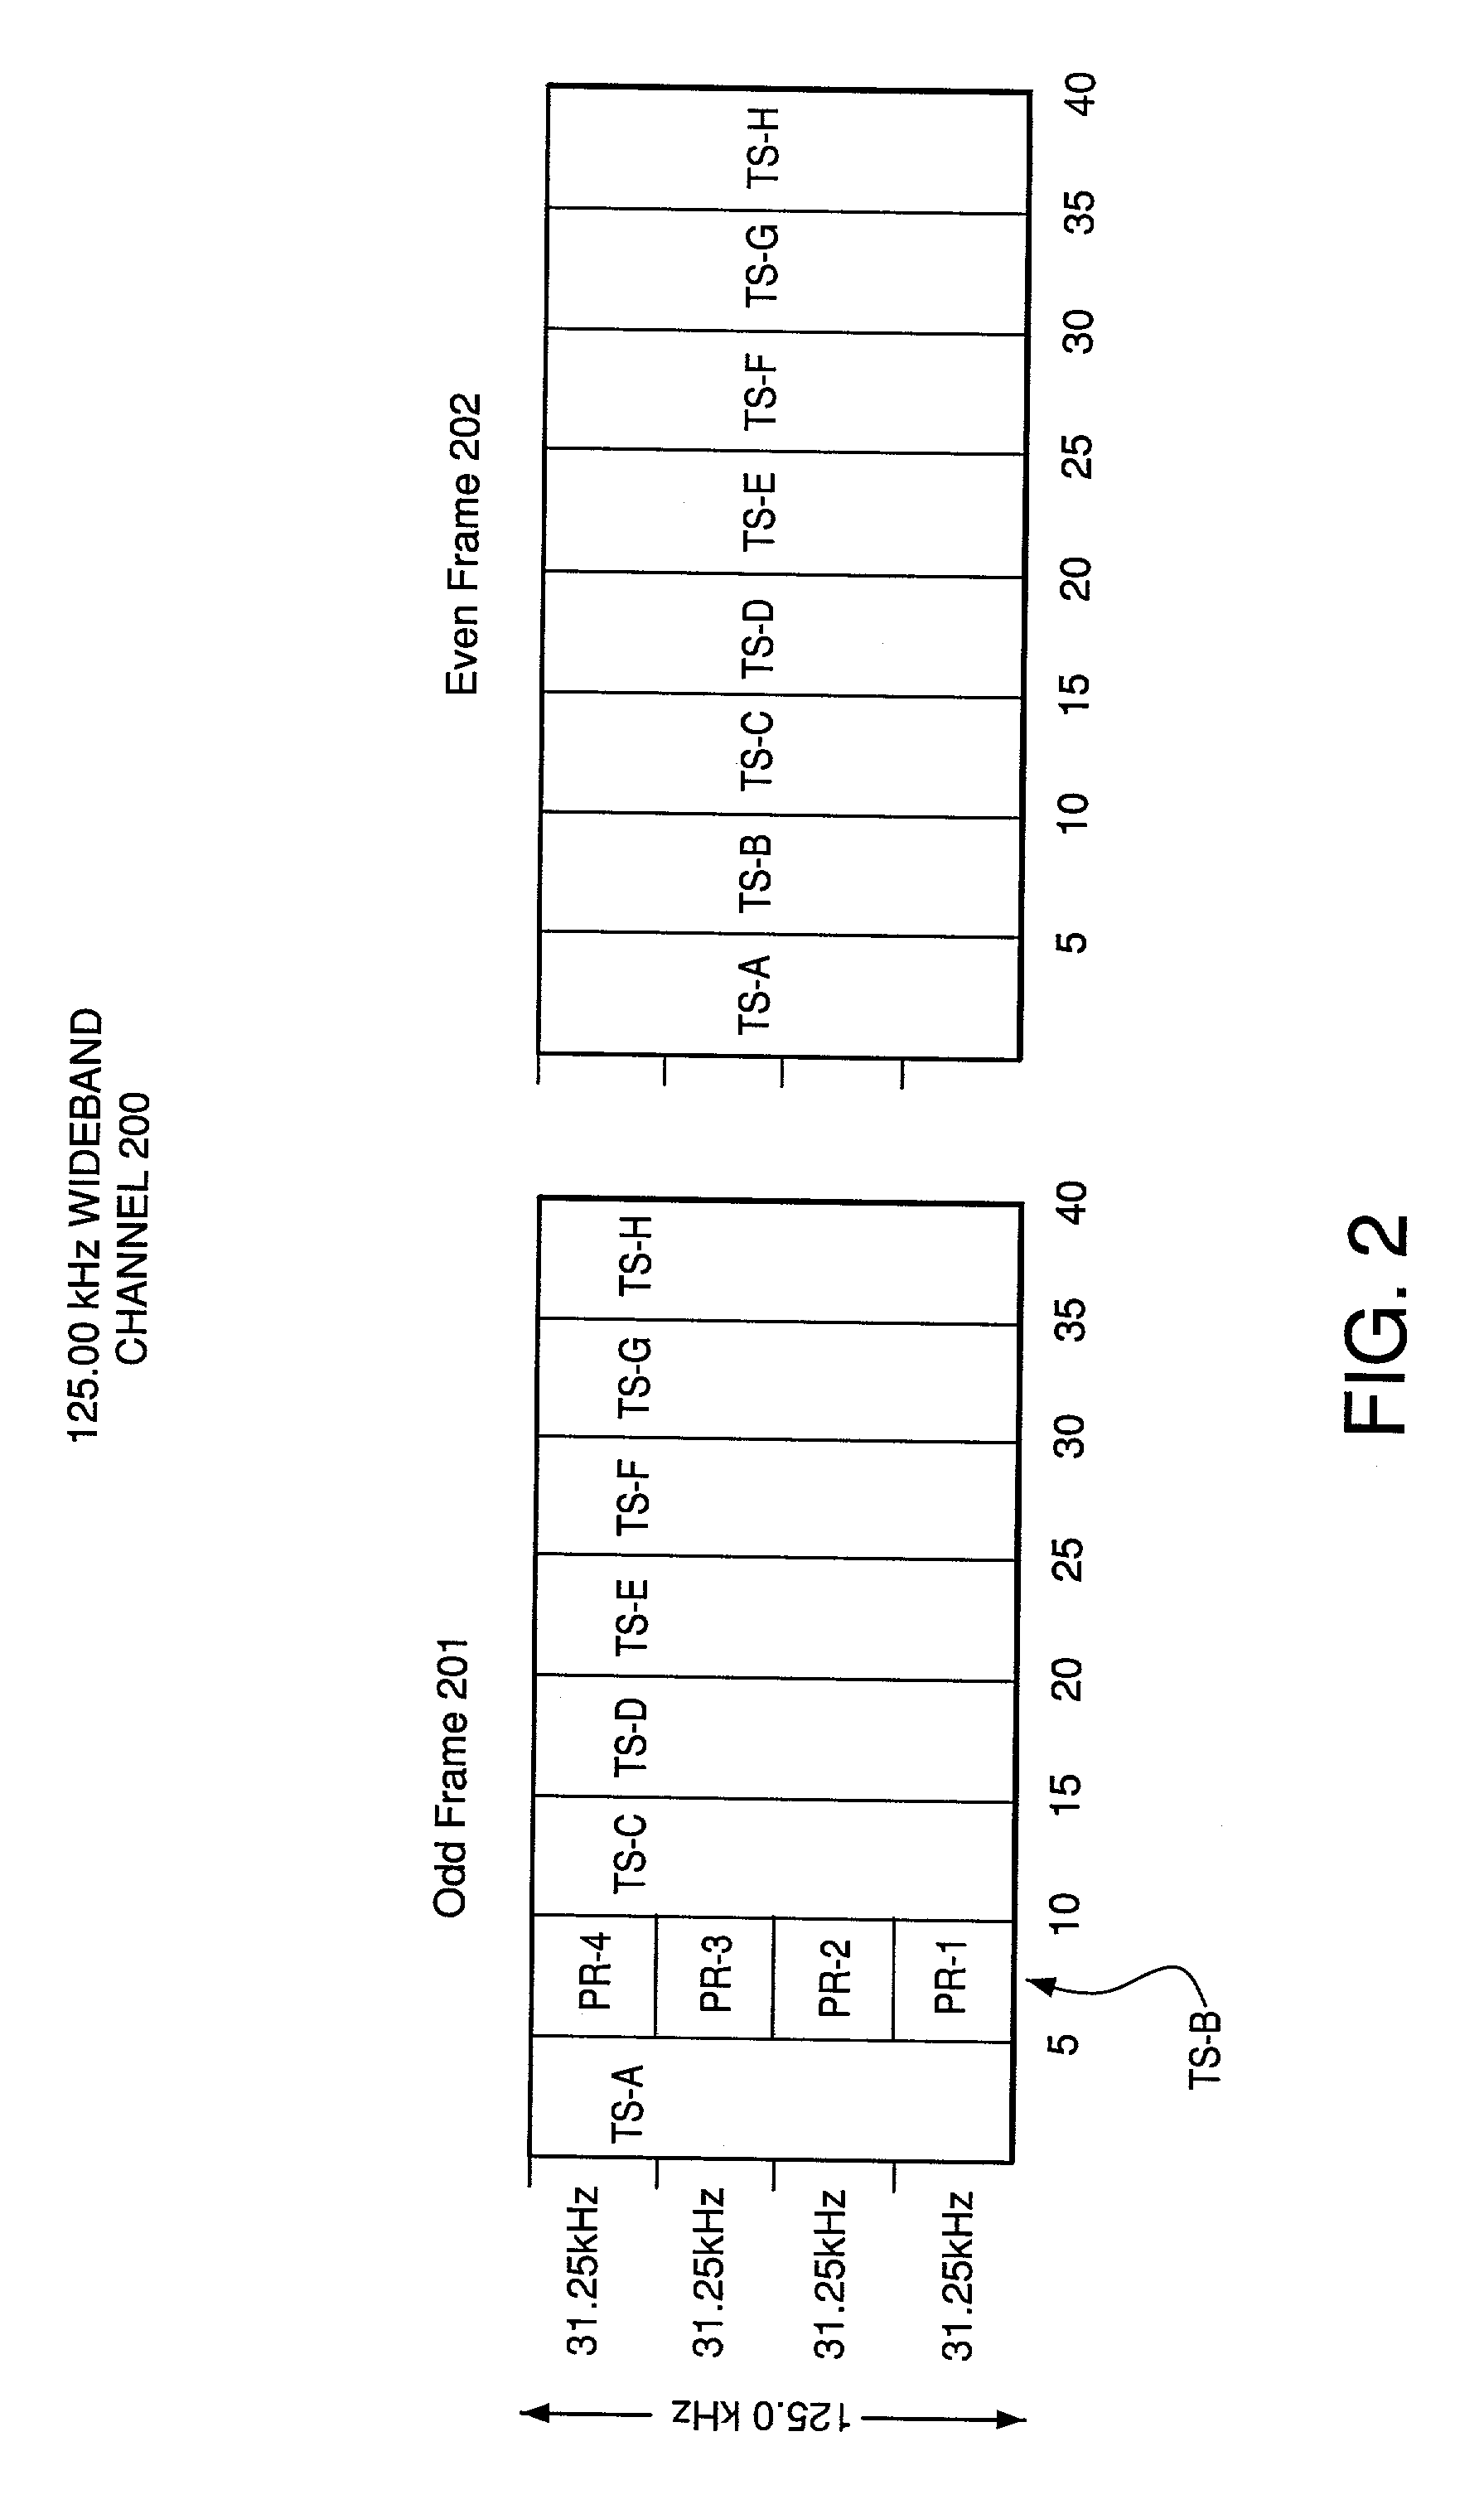 System and method for efficiently using channel unit hardware to provide multiple narrowband channels overlaid on a single wideband channel in a satellite communications network